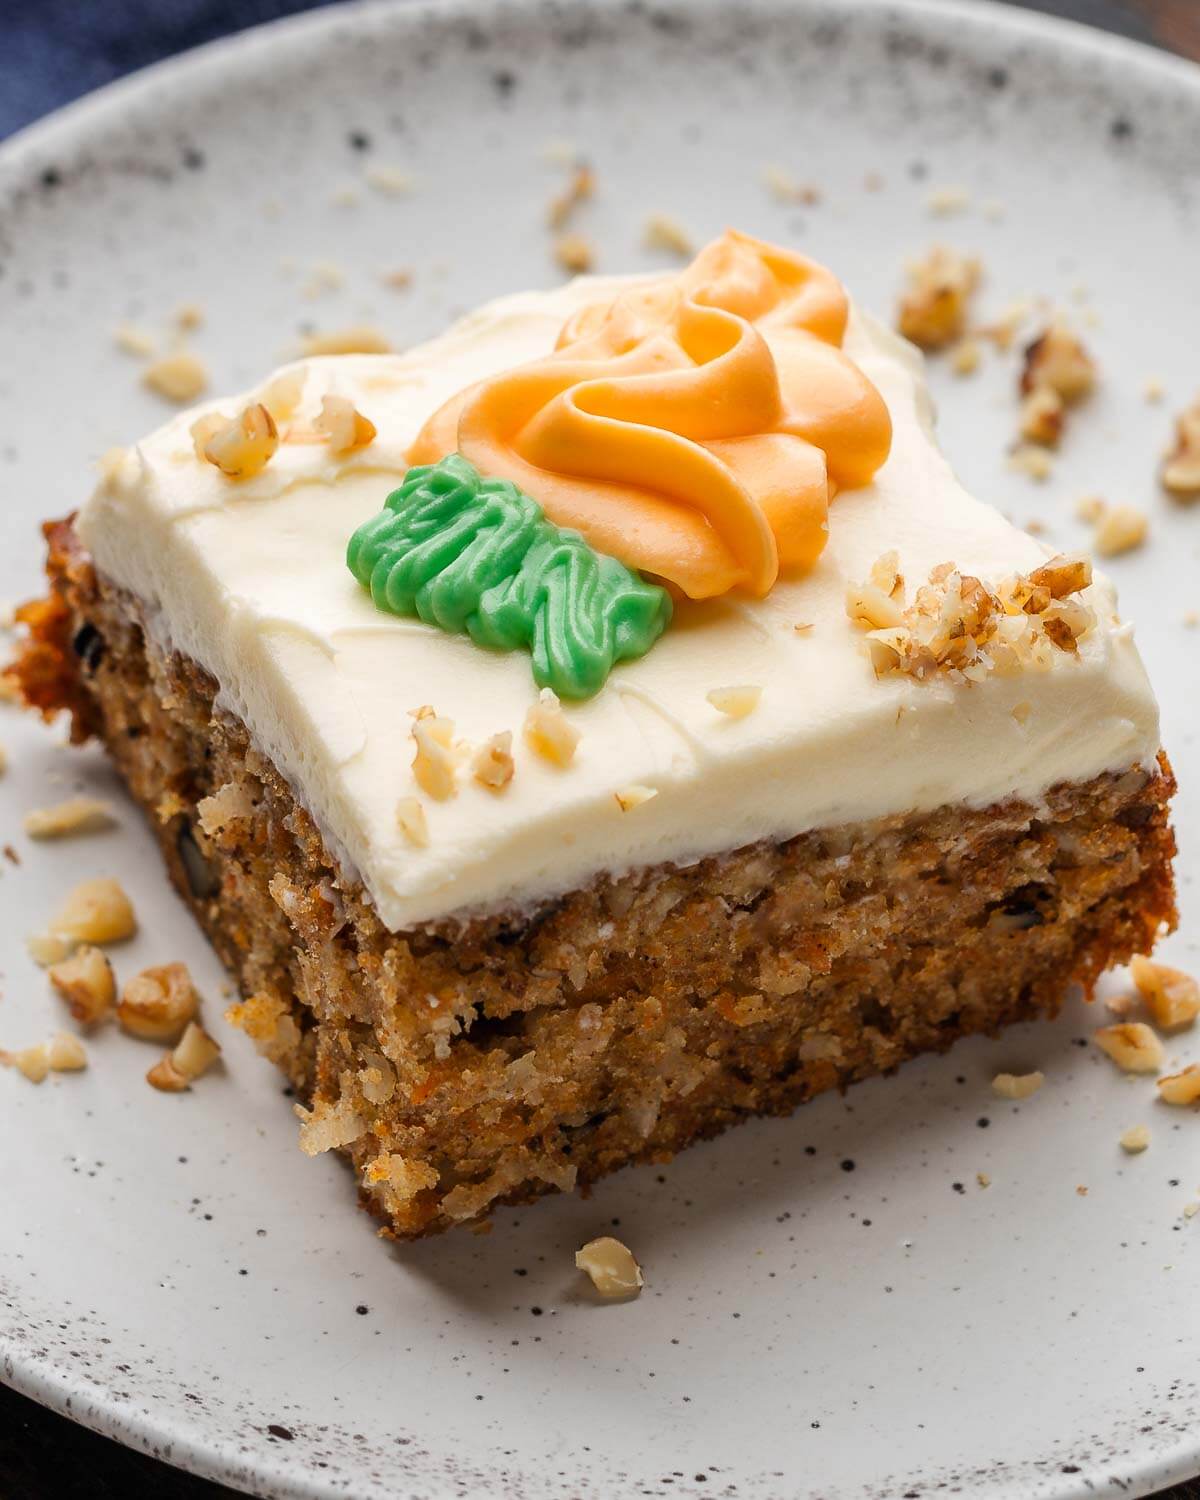 Carrot cake in white plate with sprinkled walnuts around the edges.